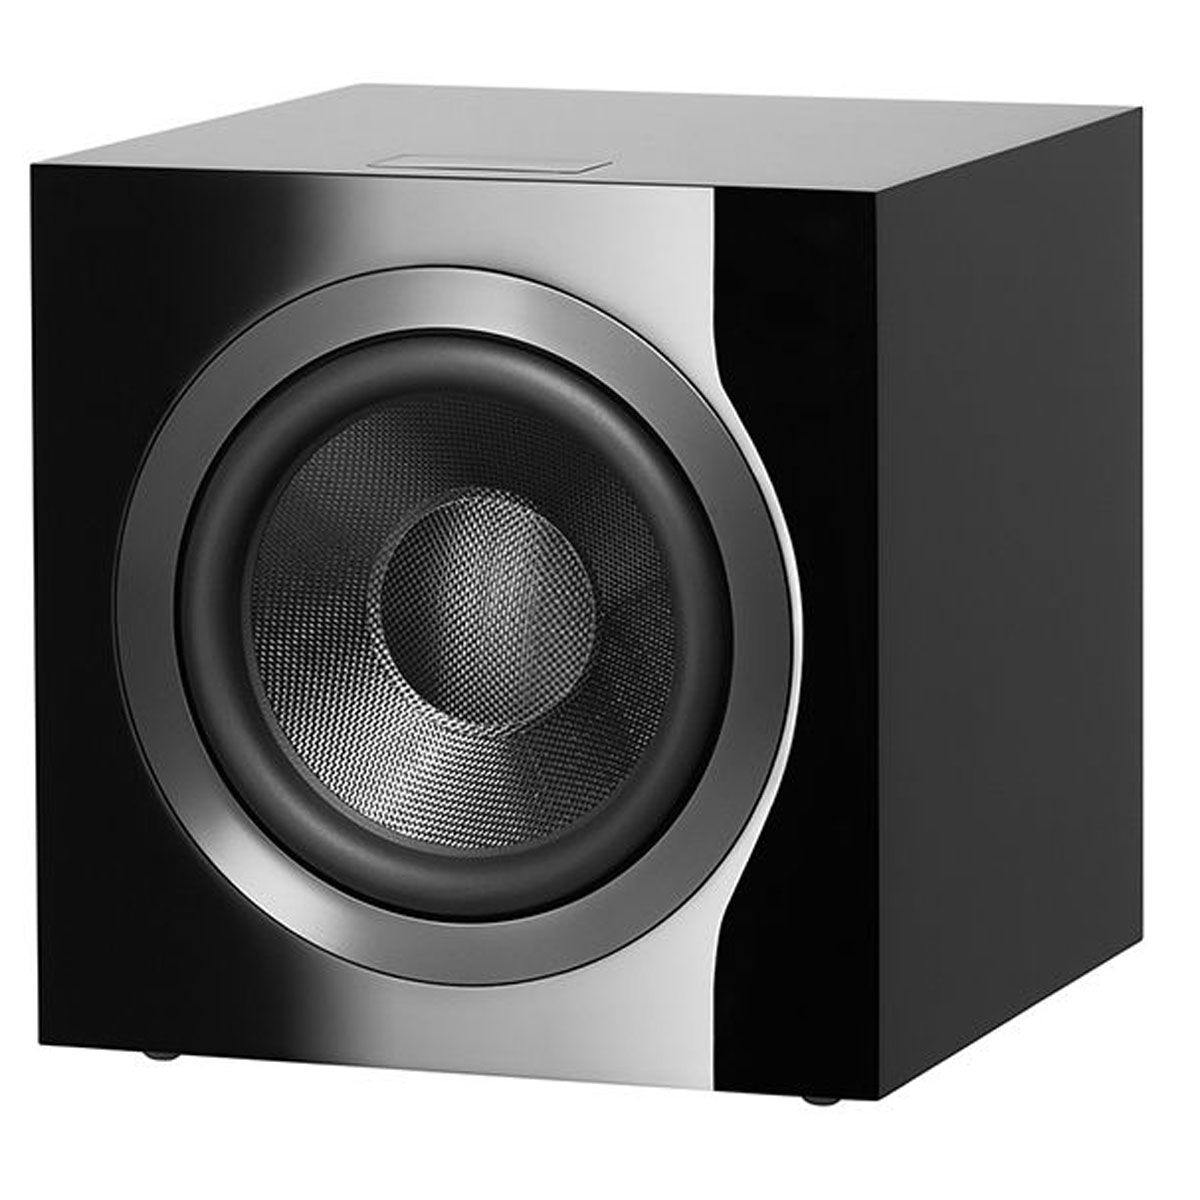 Bowers & Wilkins DB4S Subwoofer - Gloss Black - Front angled view without grille